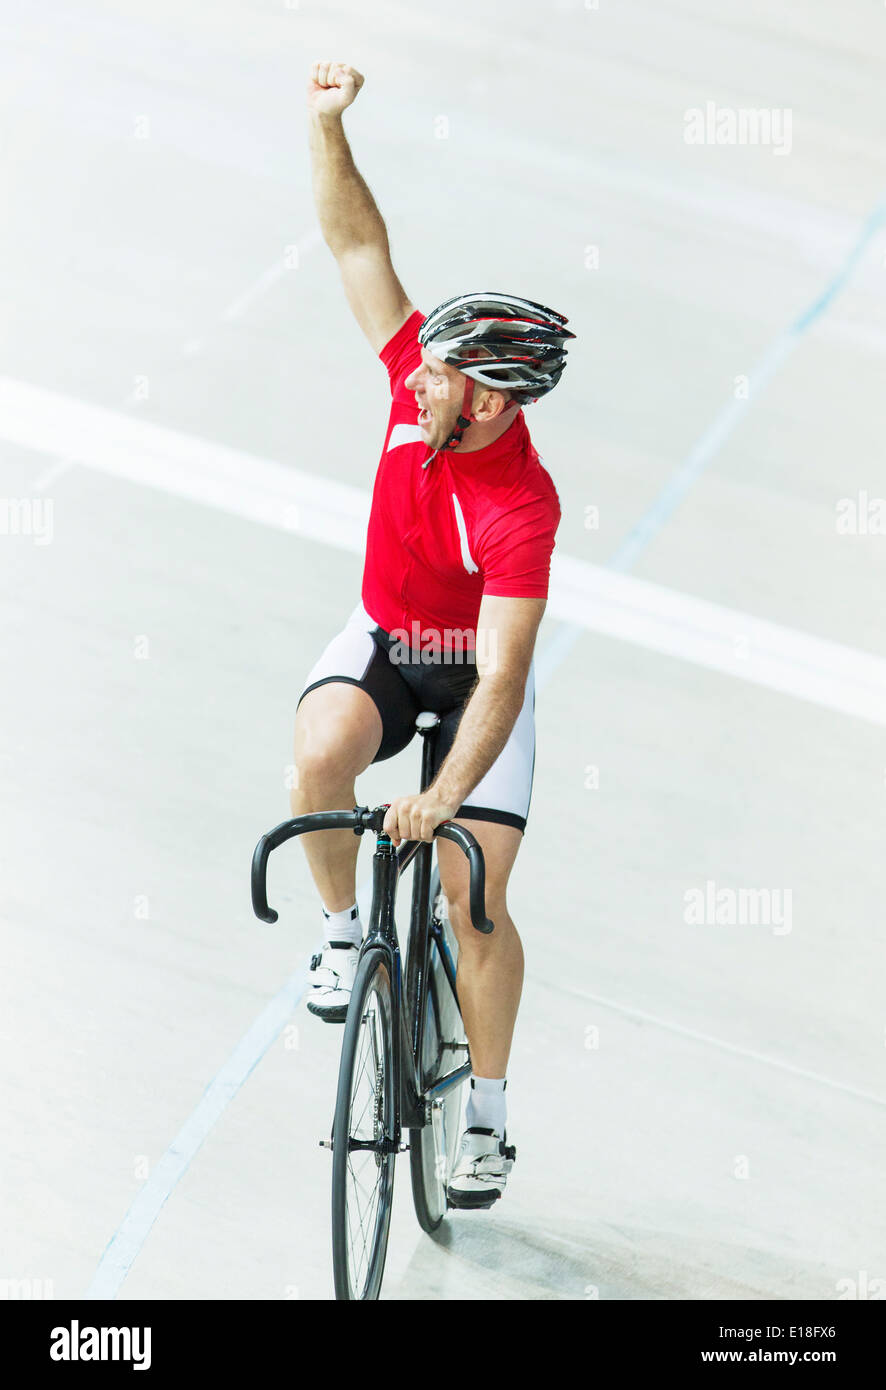 Track cyclist celebrating in velodrome Banque D'Images